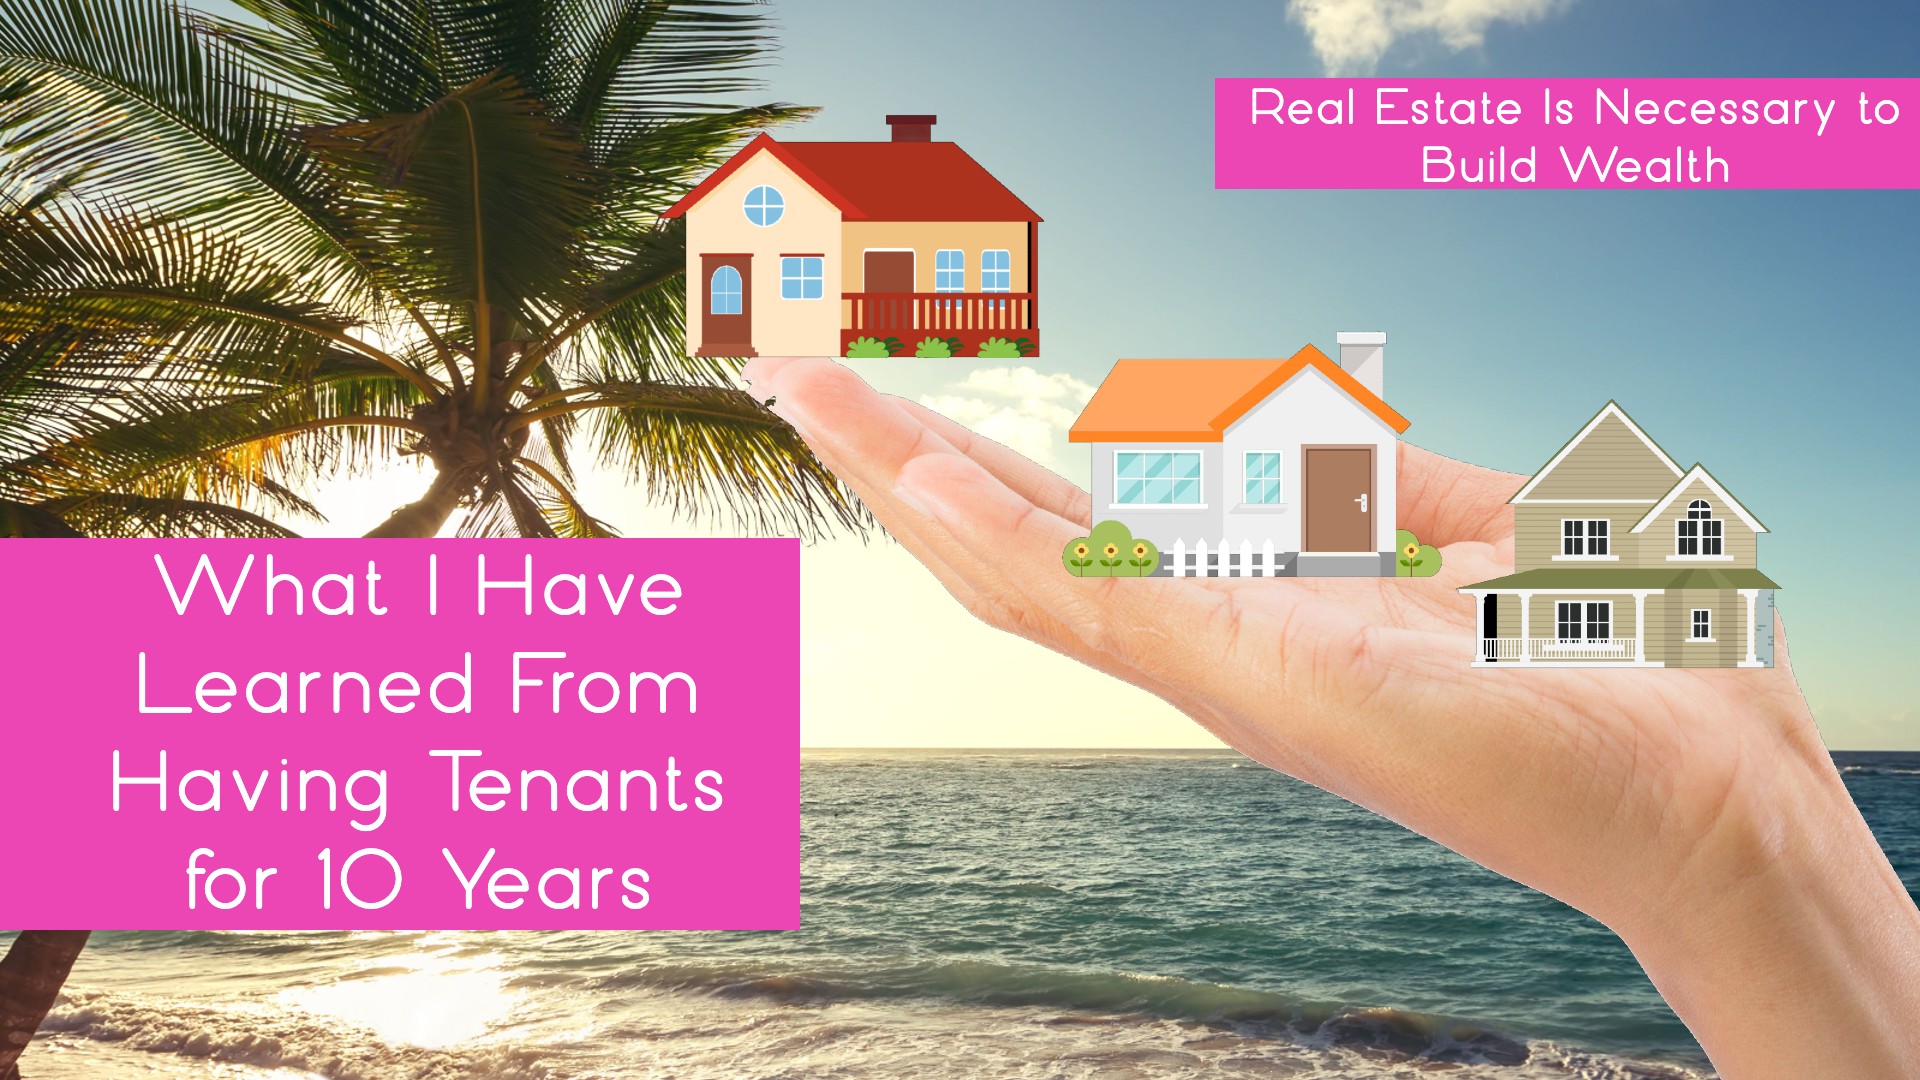 What I Have Learned From Having Tenants for 10 Years